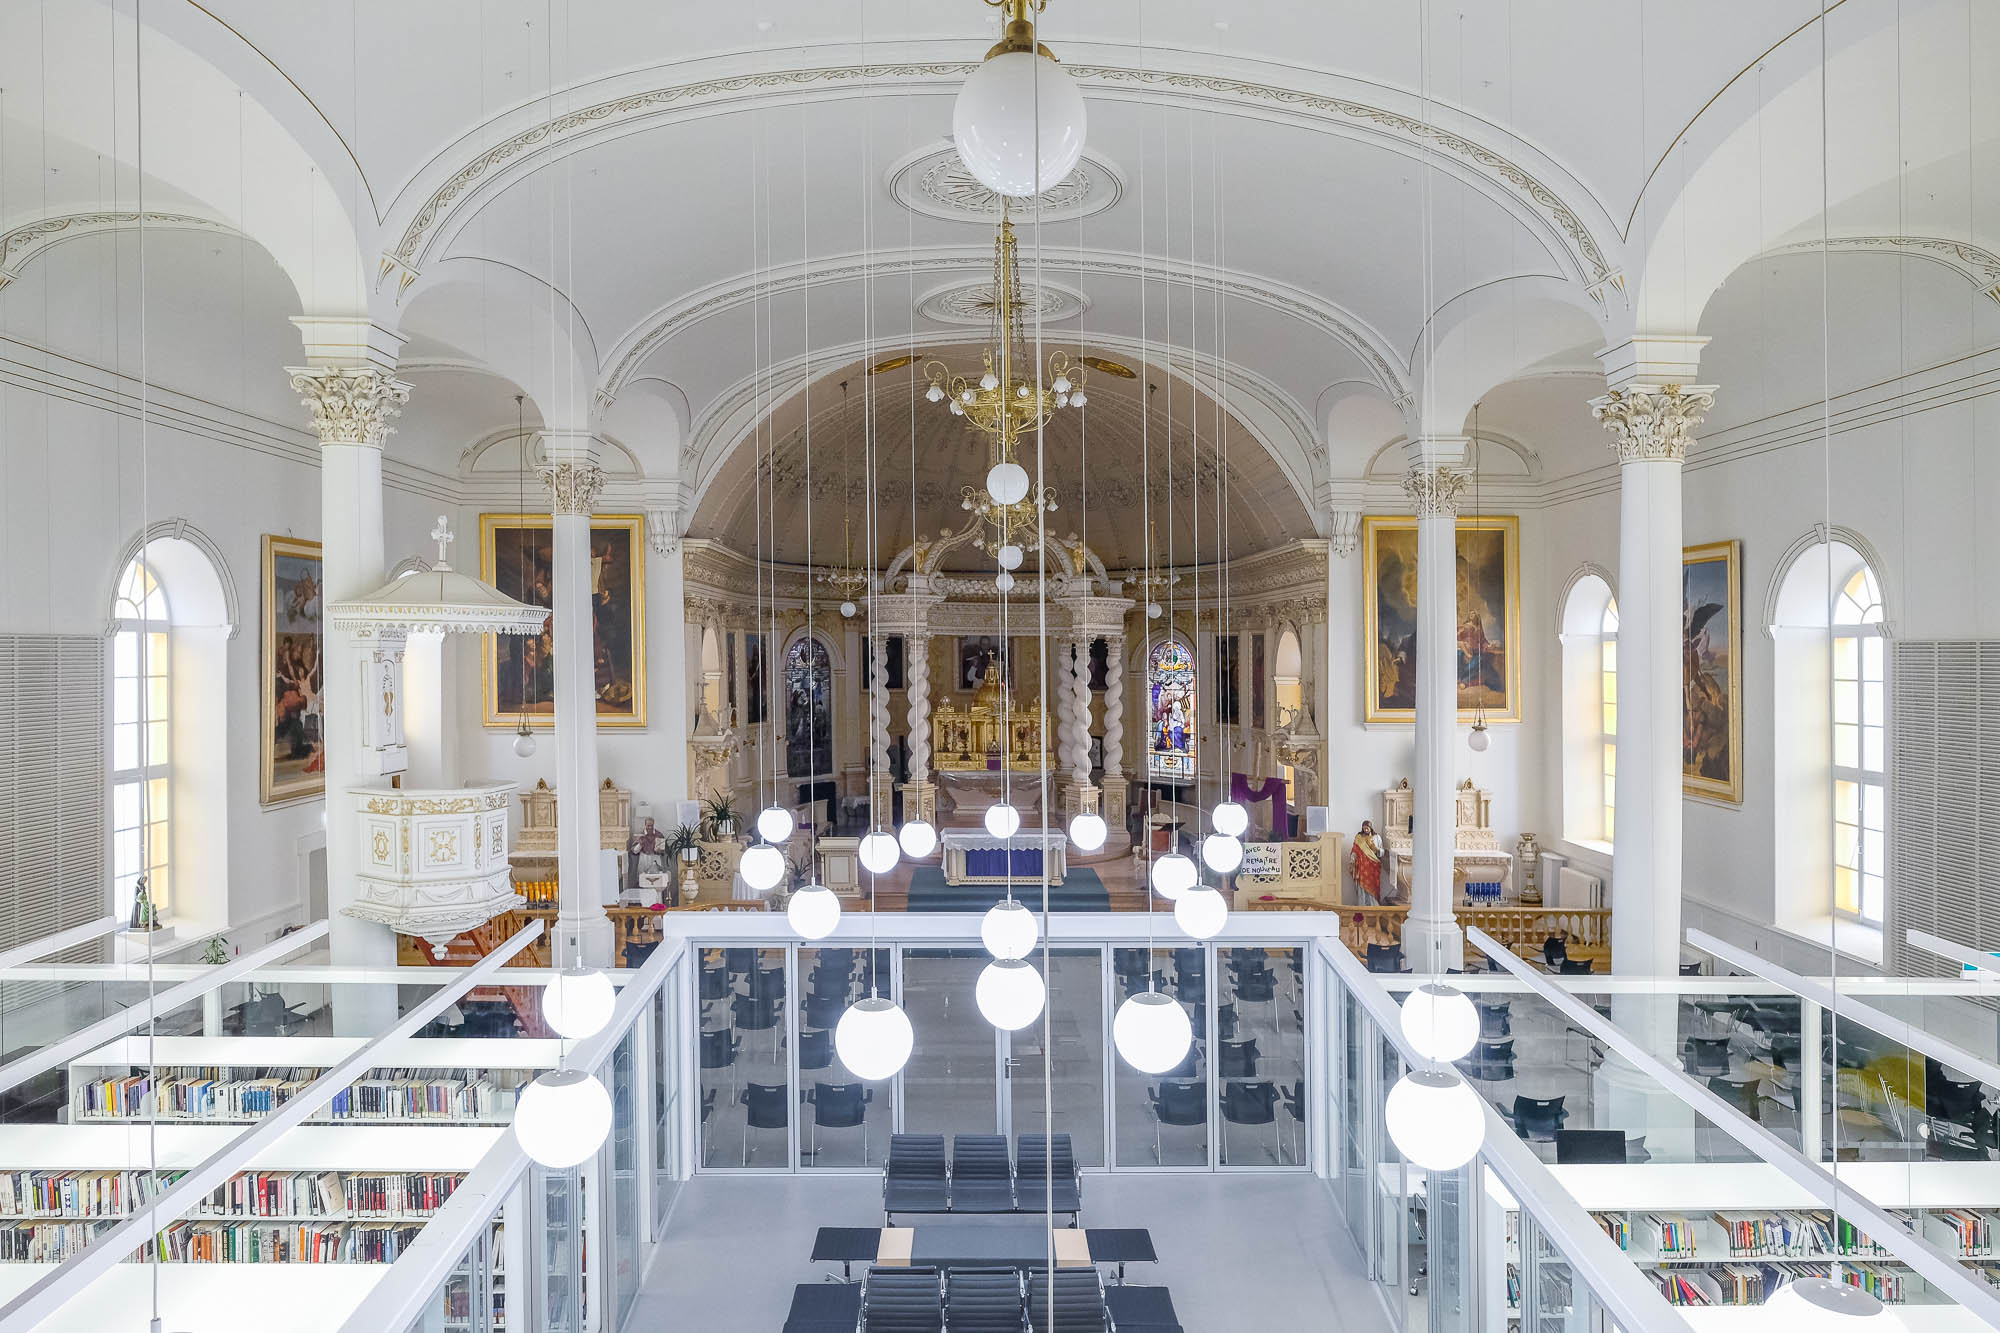 Interior of a church converted to a library. A glass enclosure containing the library is in the forefront, only occupying part of the church, which can be seen at the back.